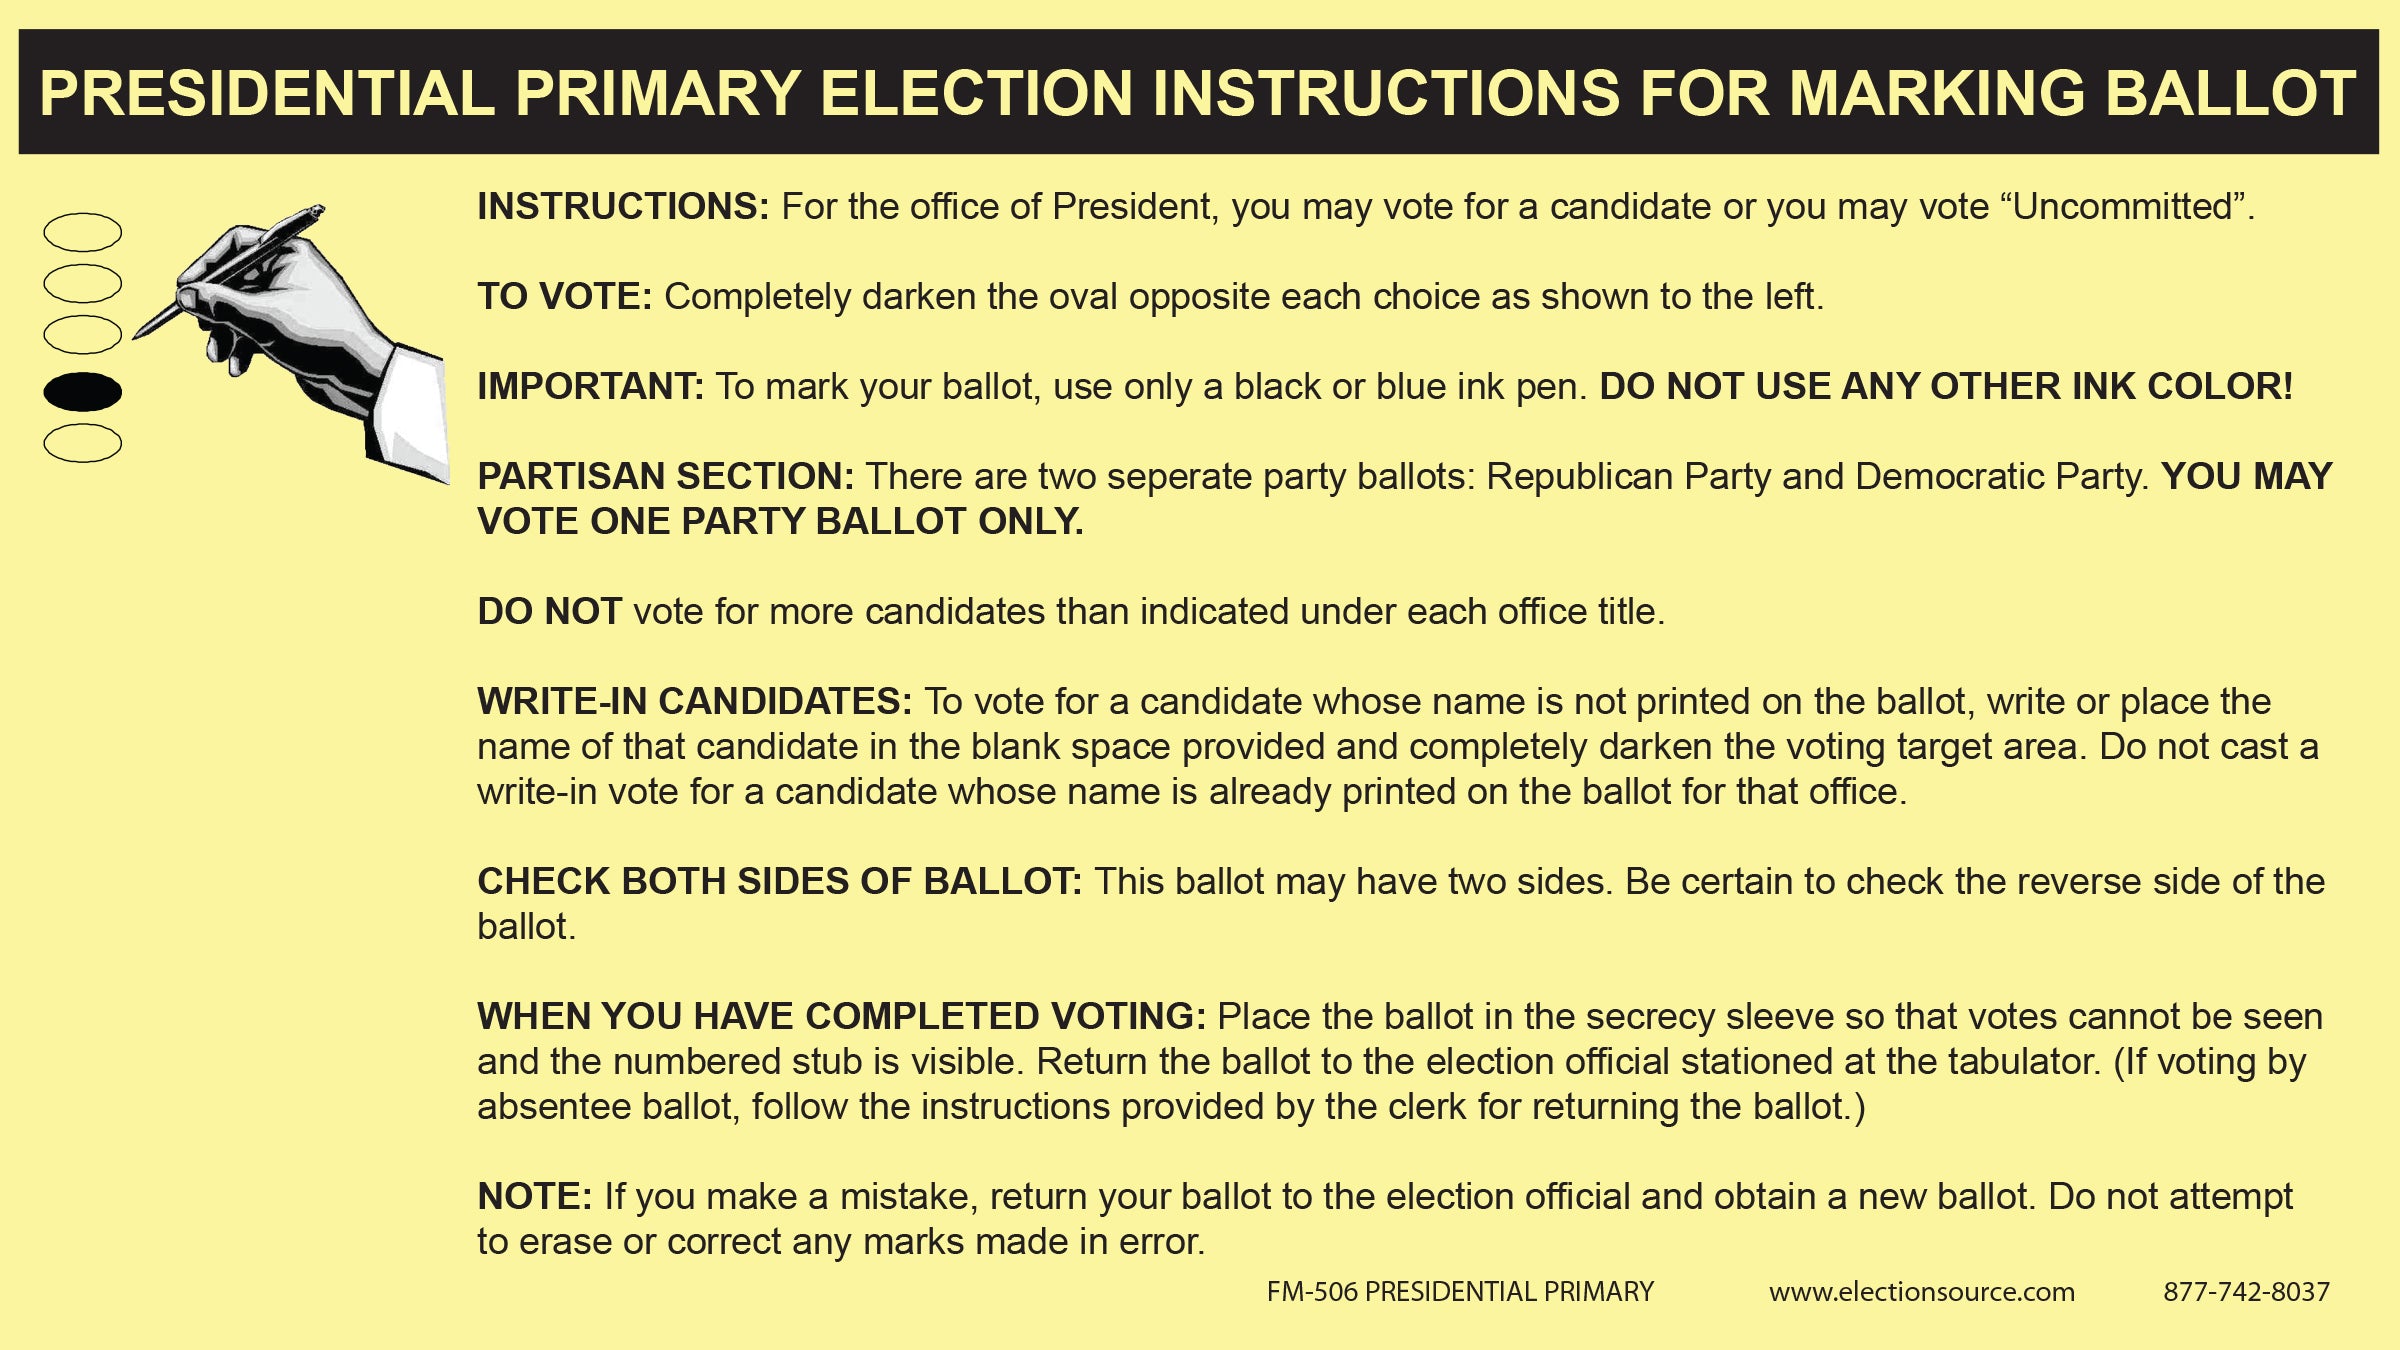 Oval Absent Voter Ballot Marking Instructions Presidential Primary